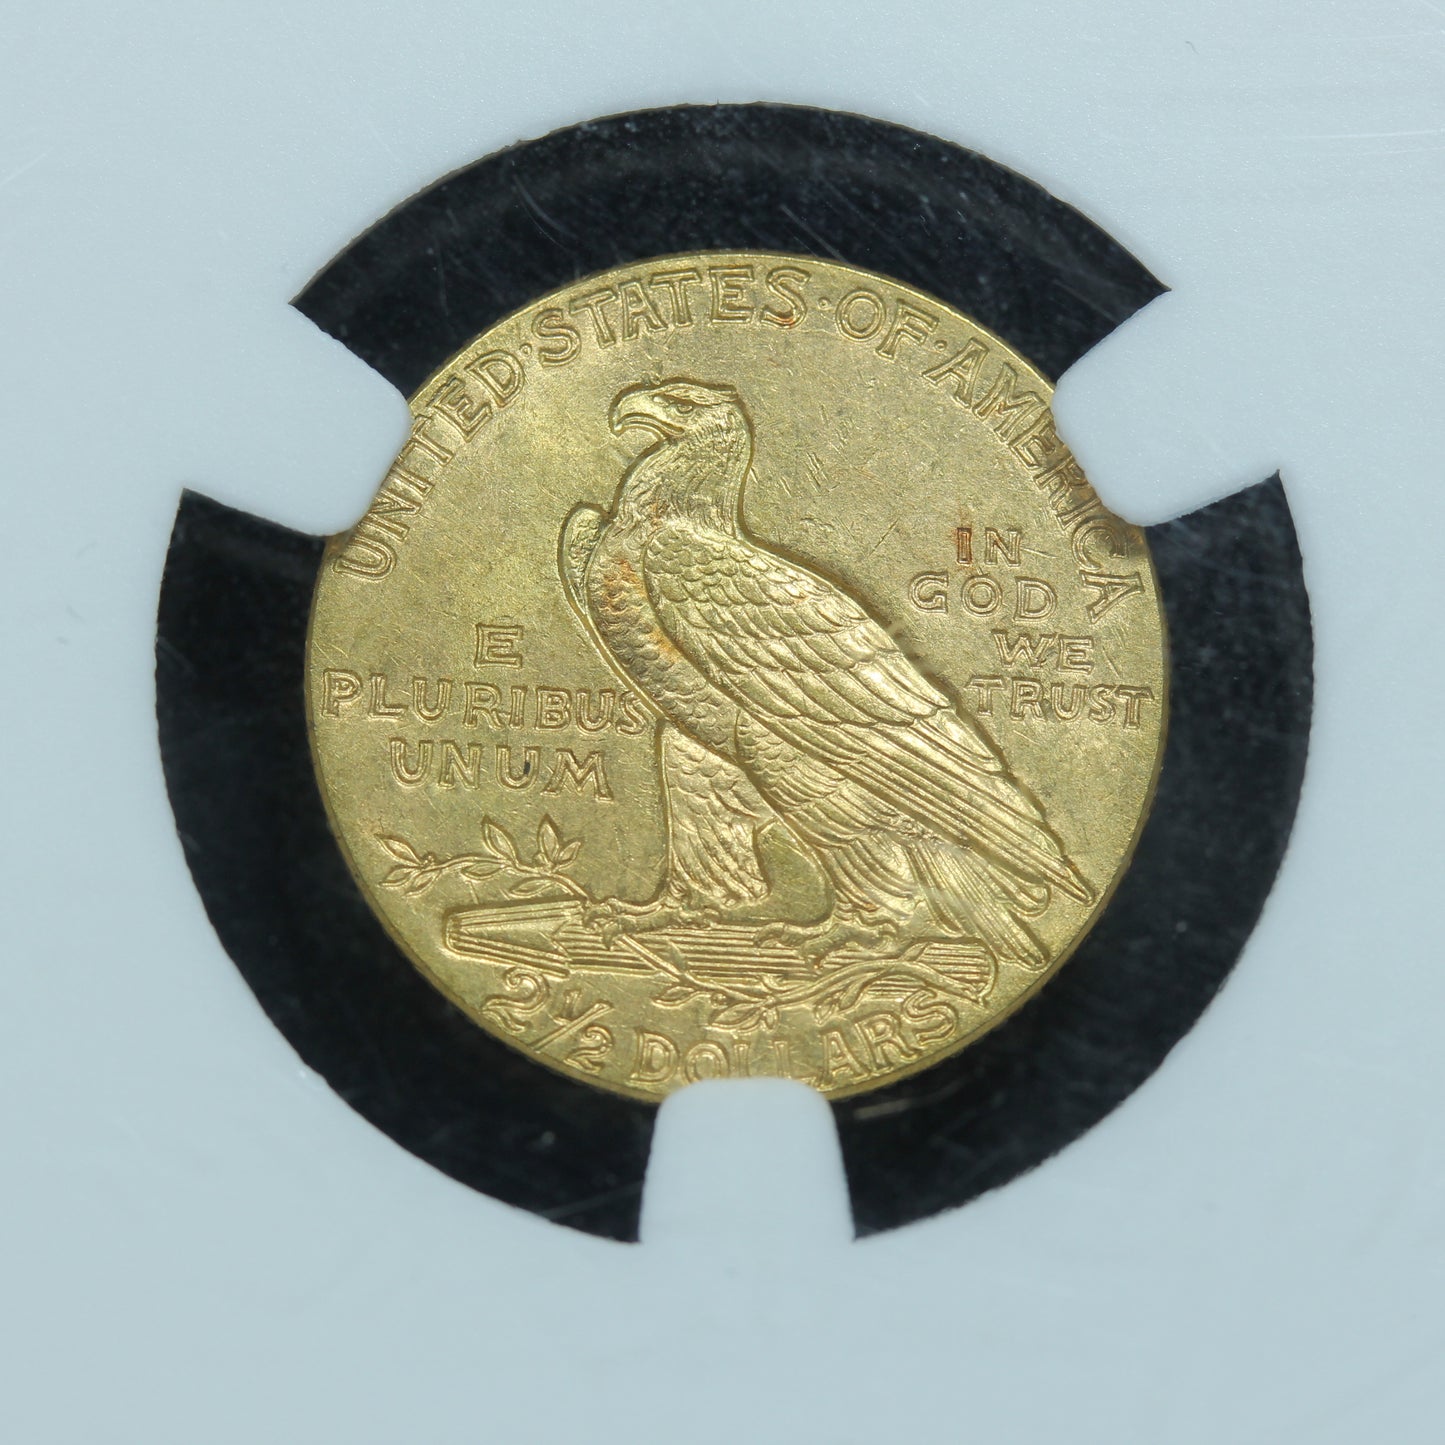 1928 $ 2.5 2.50 Gold Indian Head Quarter Eagle Coin - NGC MS 62